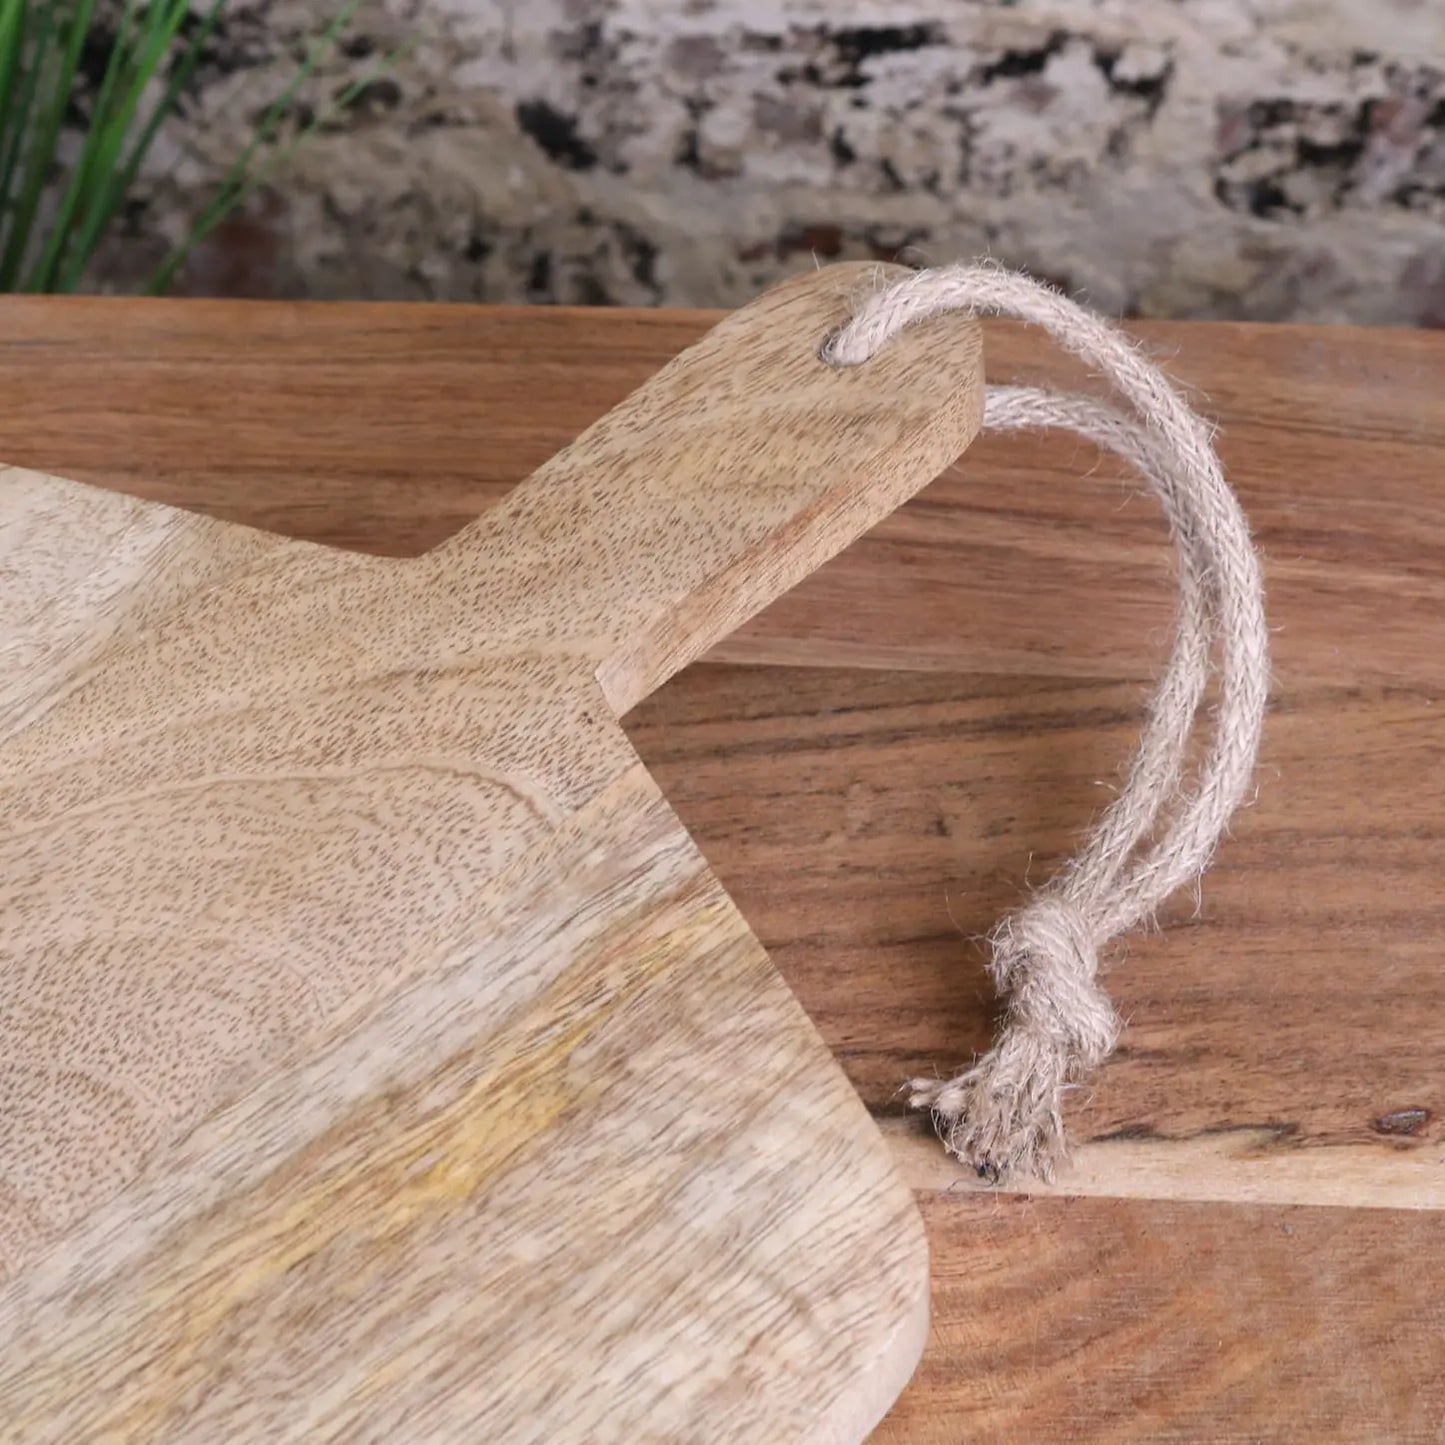 General Store Wooden Chopping Board 50cm - Closeup of Handle